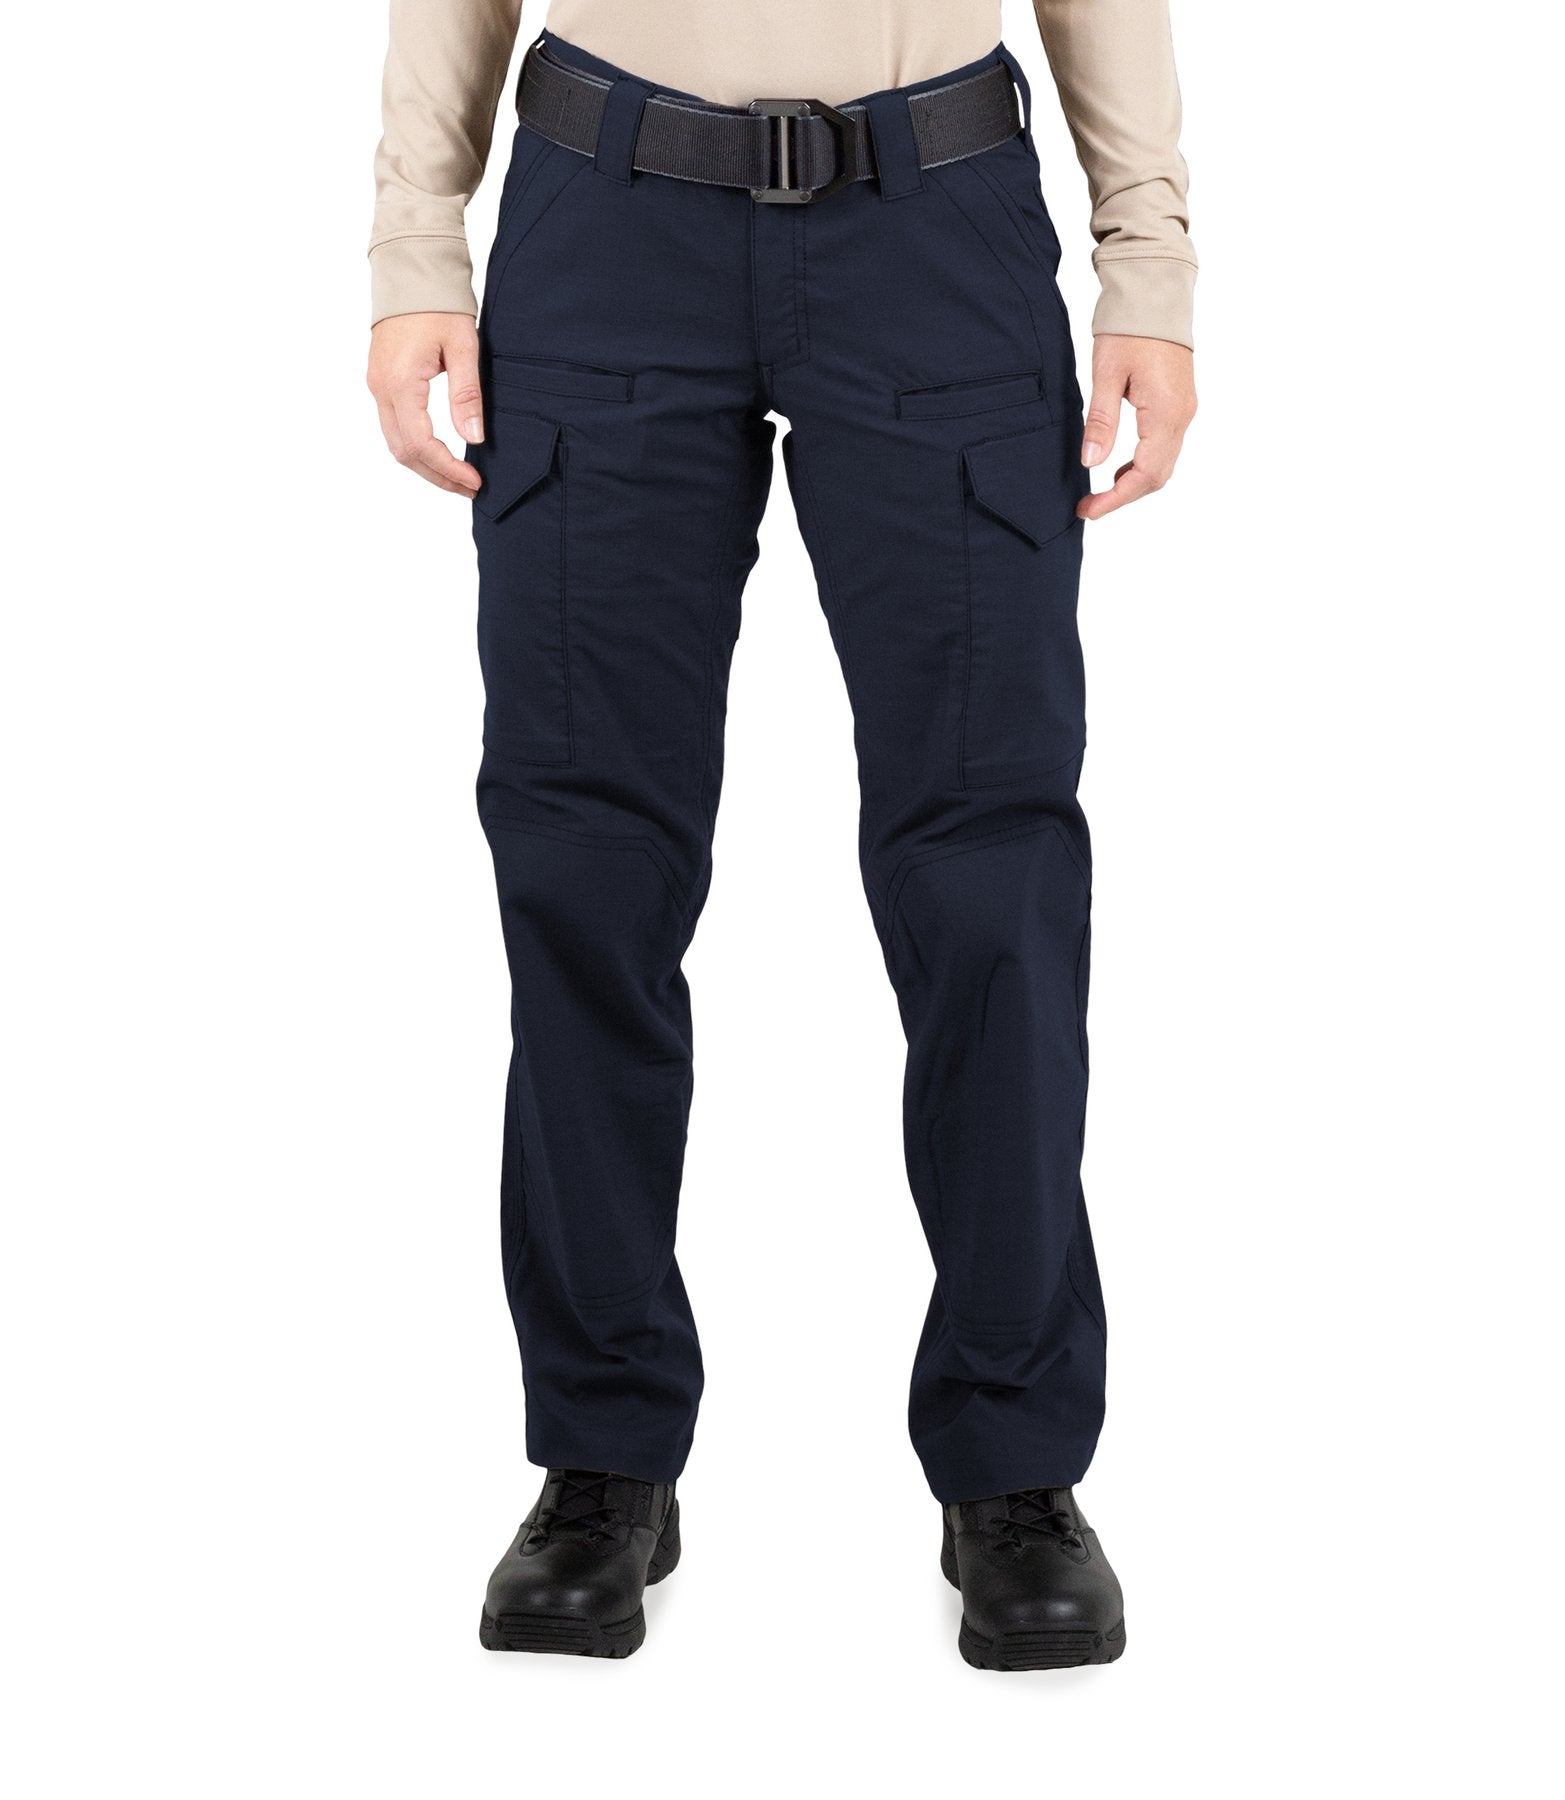 Police Product Test: First Tactical Defender Shirt and Pants